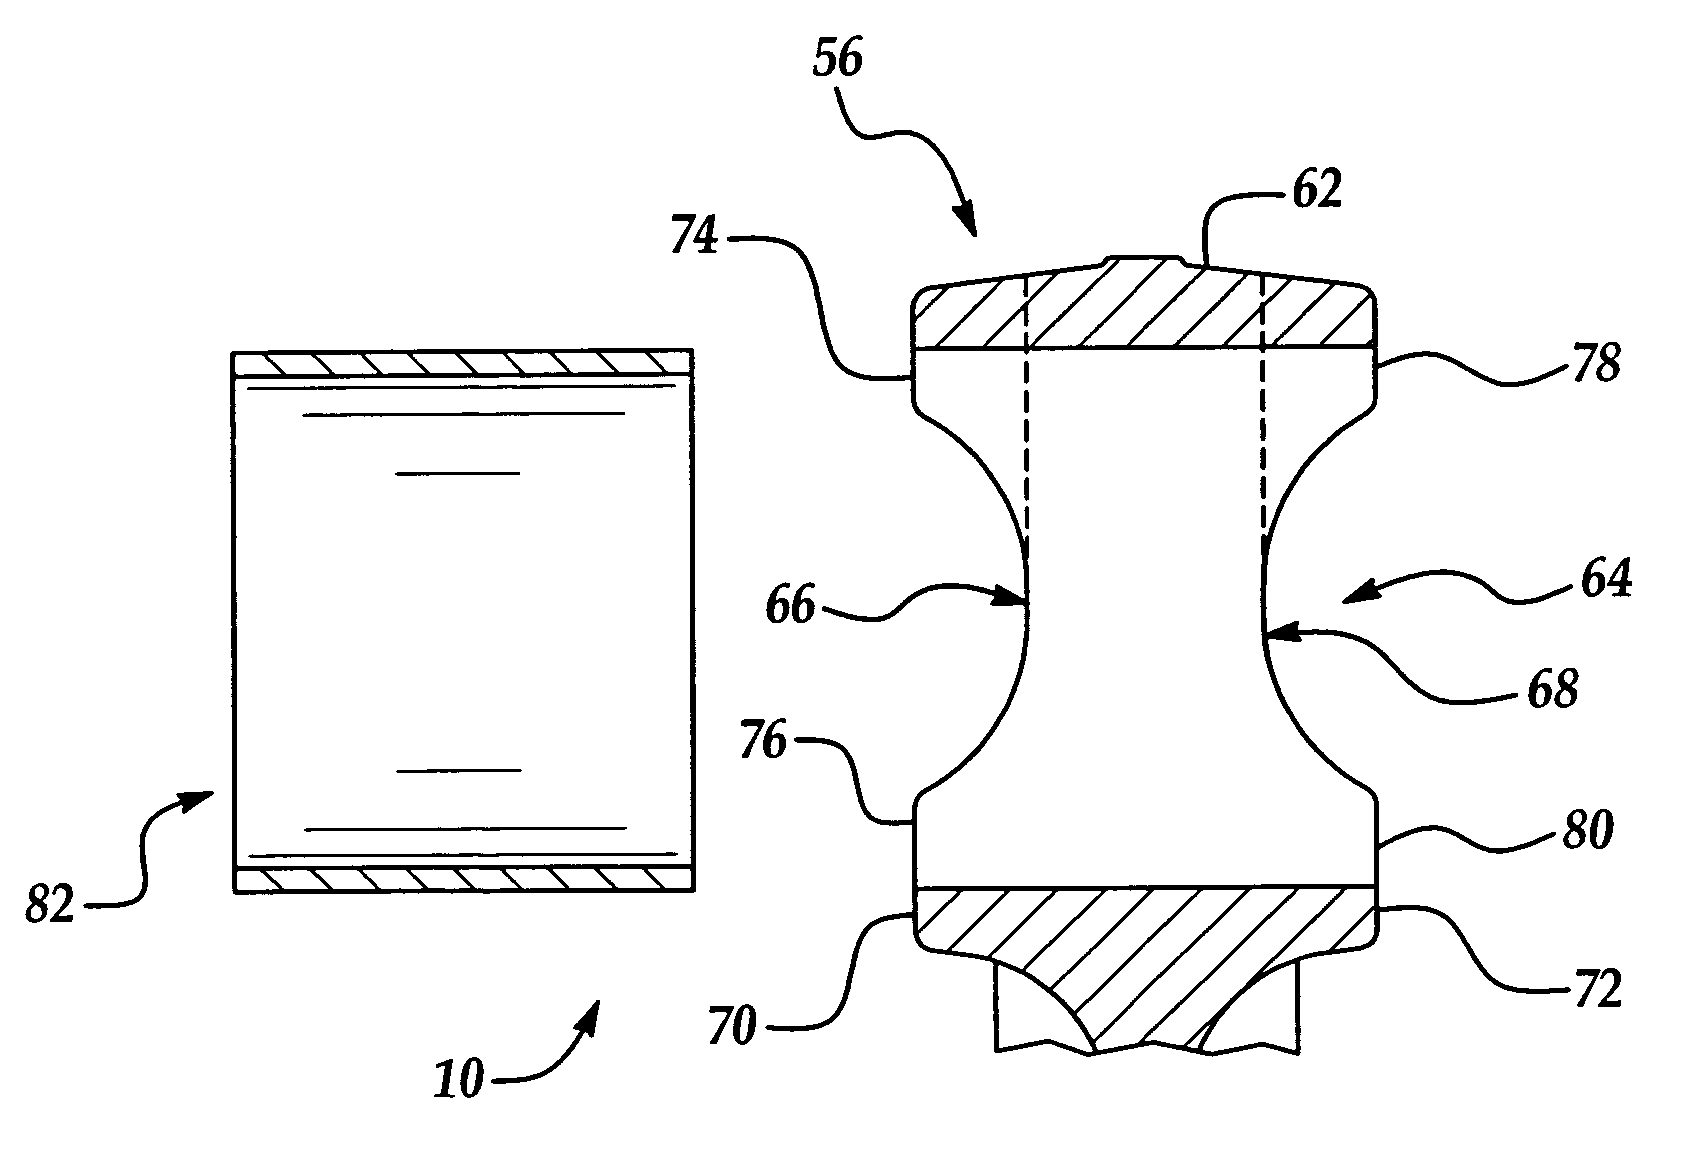 Method of manufacturing a connecting rod assembly for an internal combustion engine